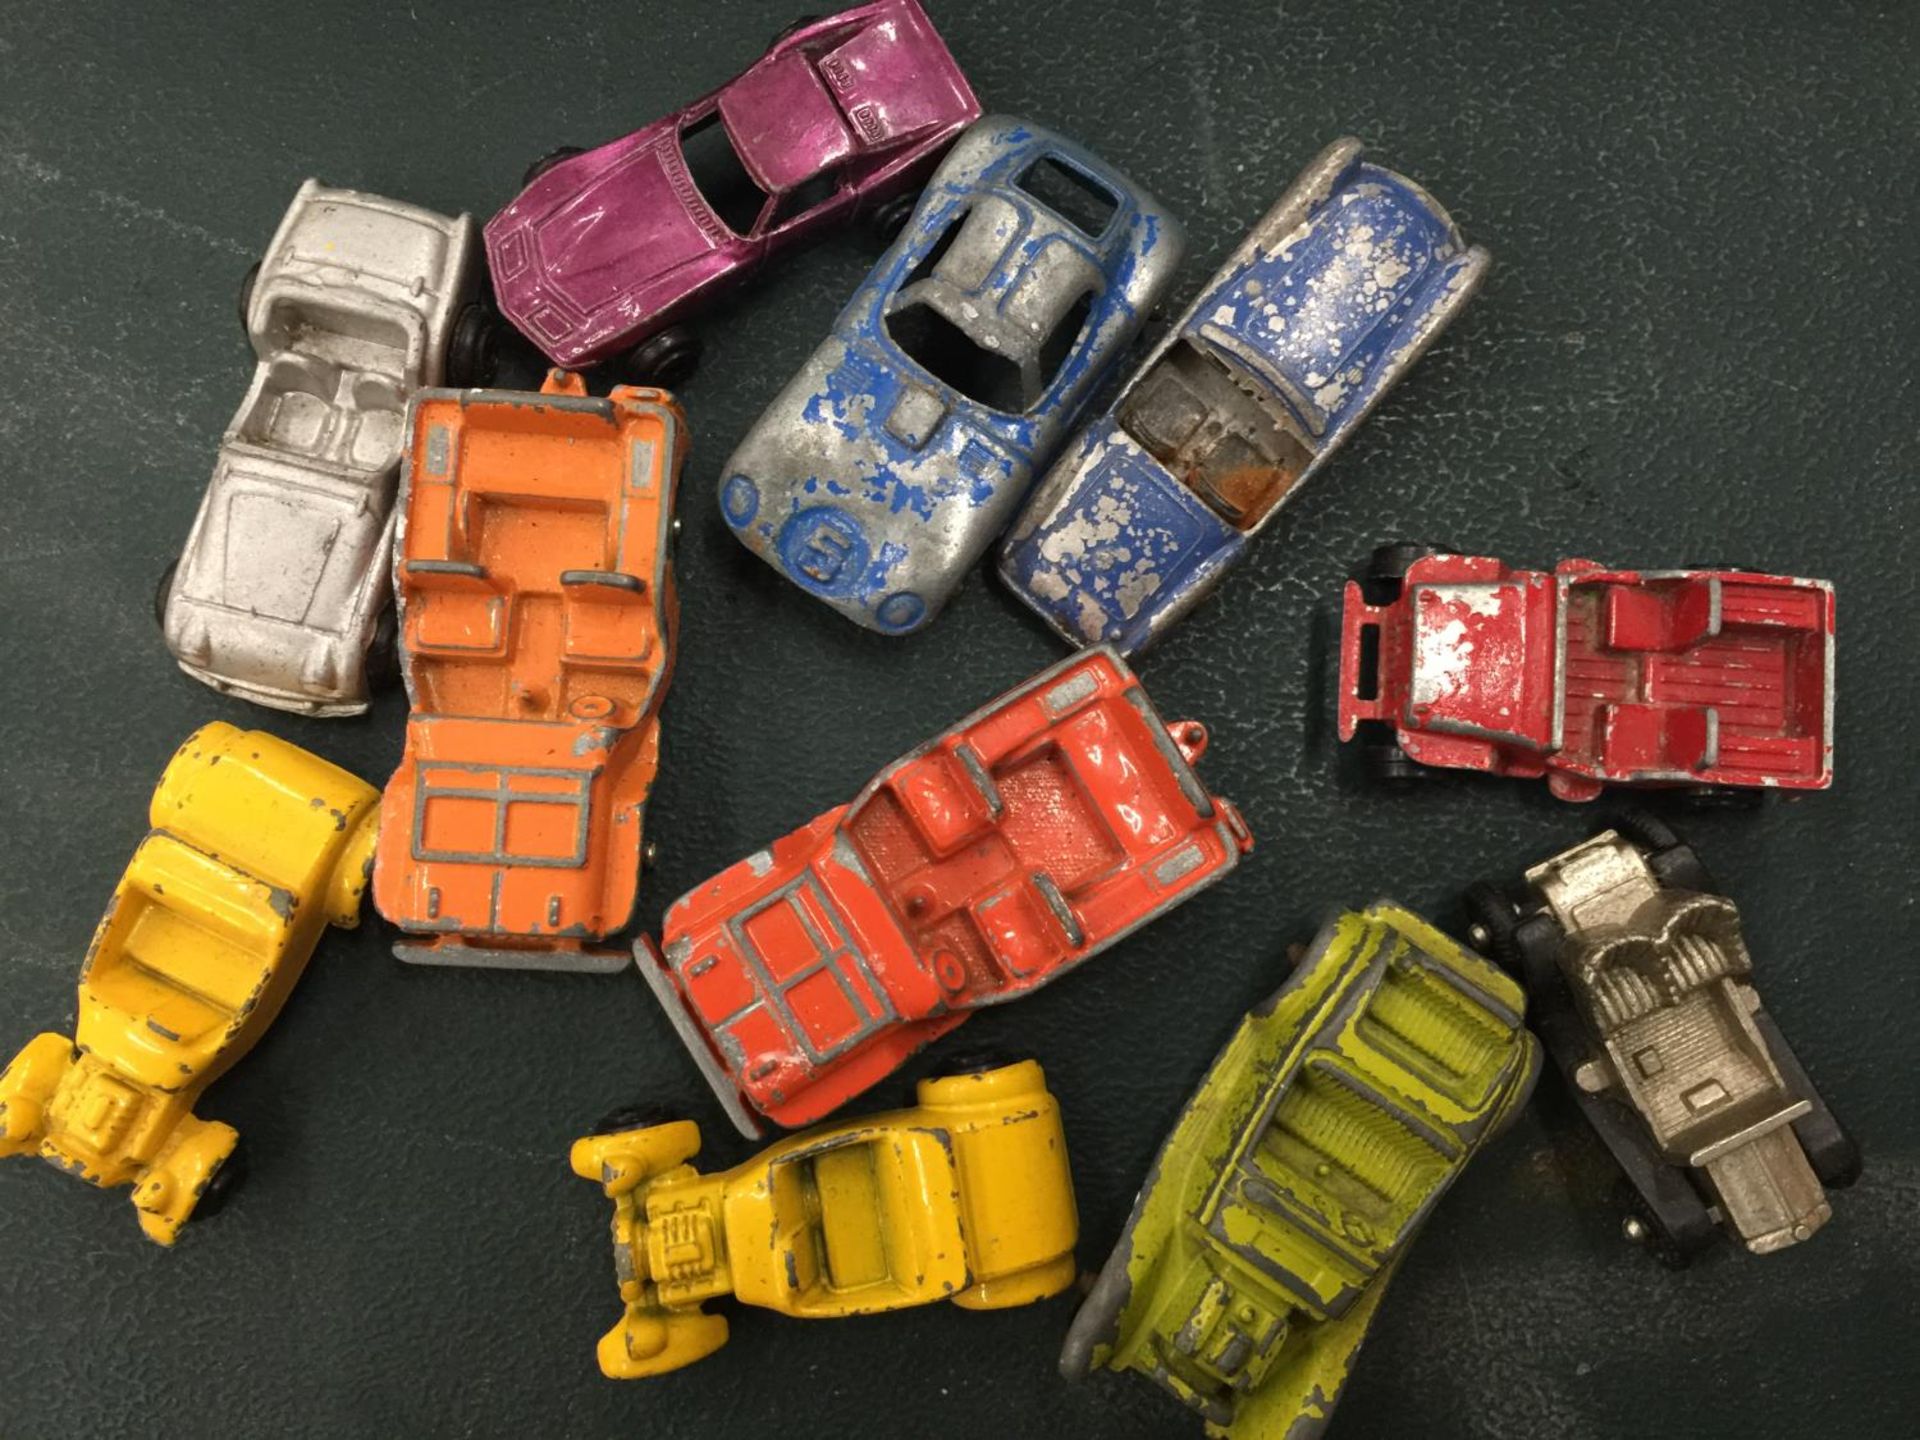 A COLLECTION OF MINIATURE VINTAGE CARS - 11 IN TOTAL